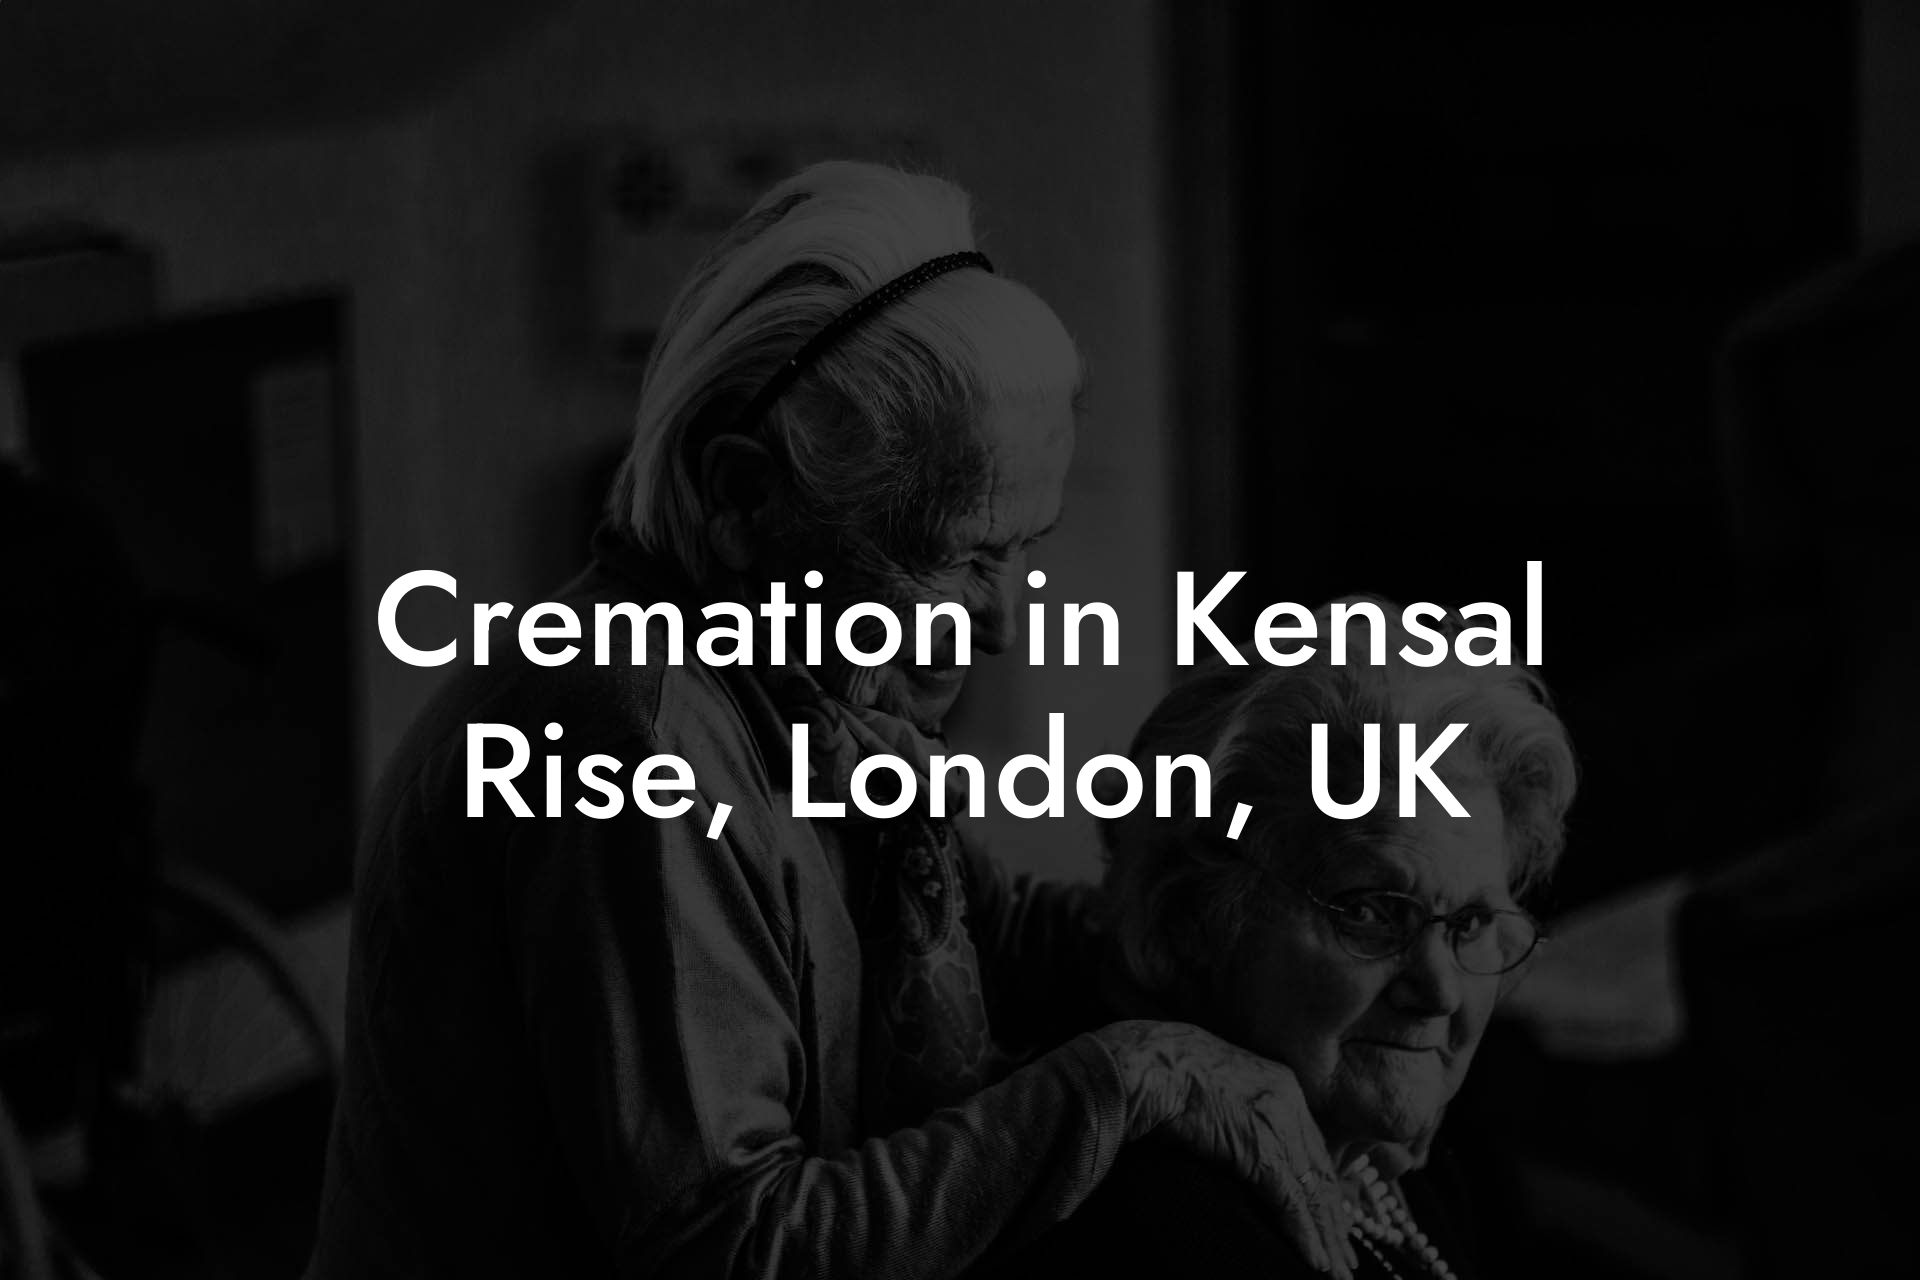 Cremation in Kensal Rise, London, UK